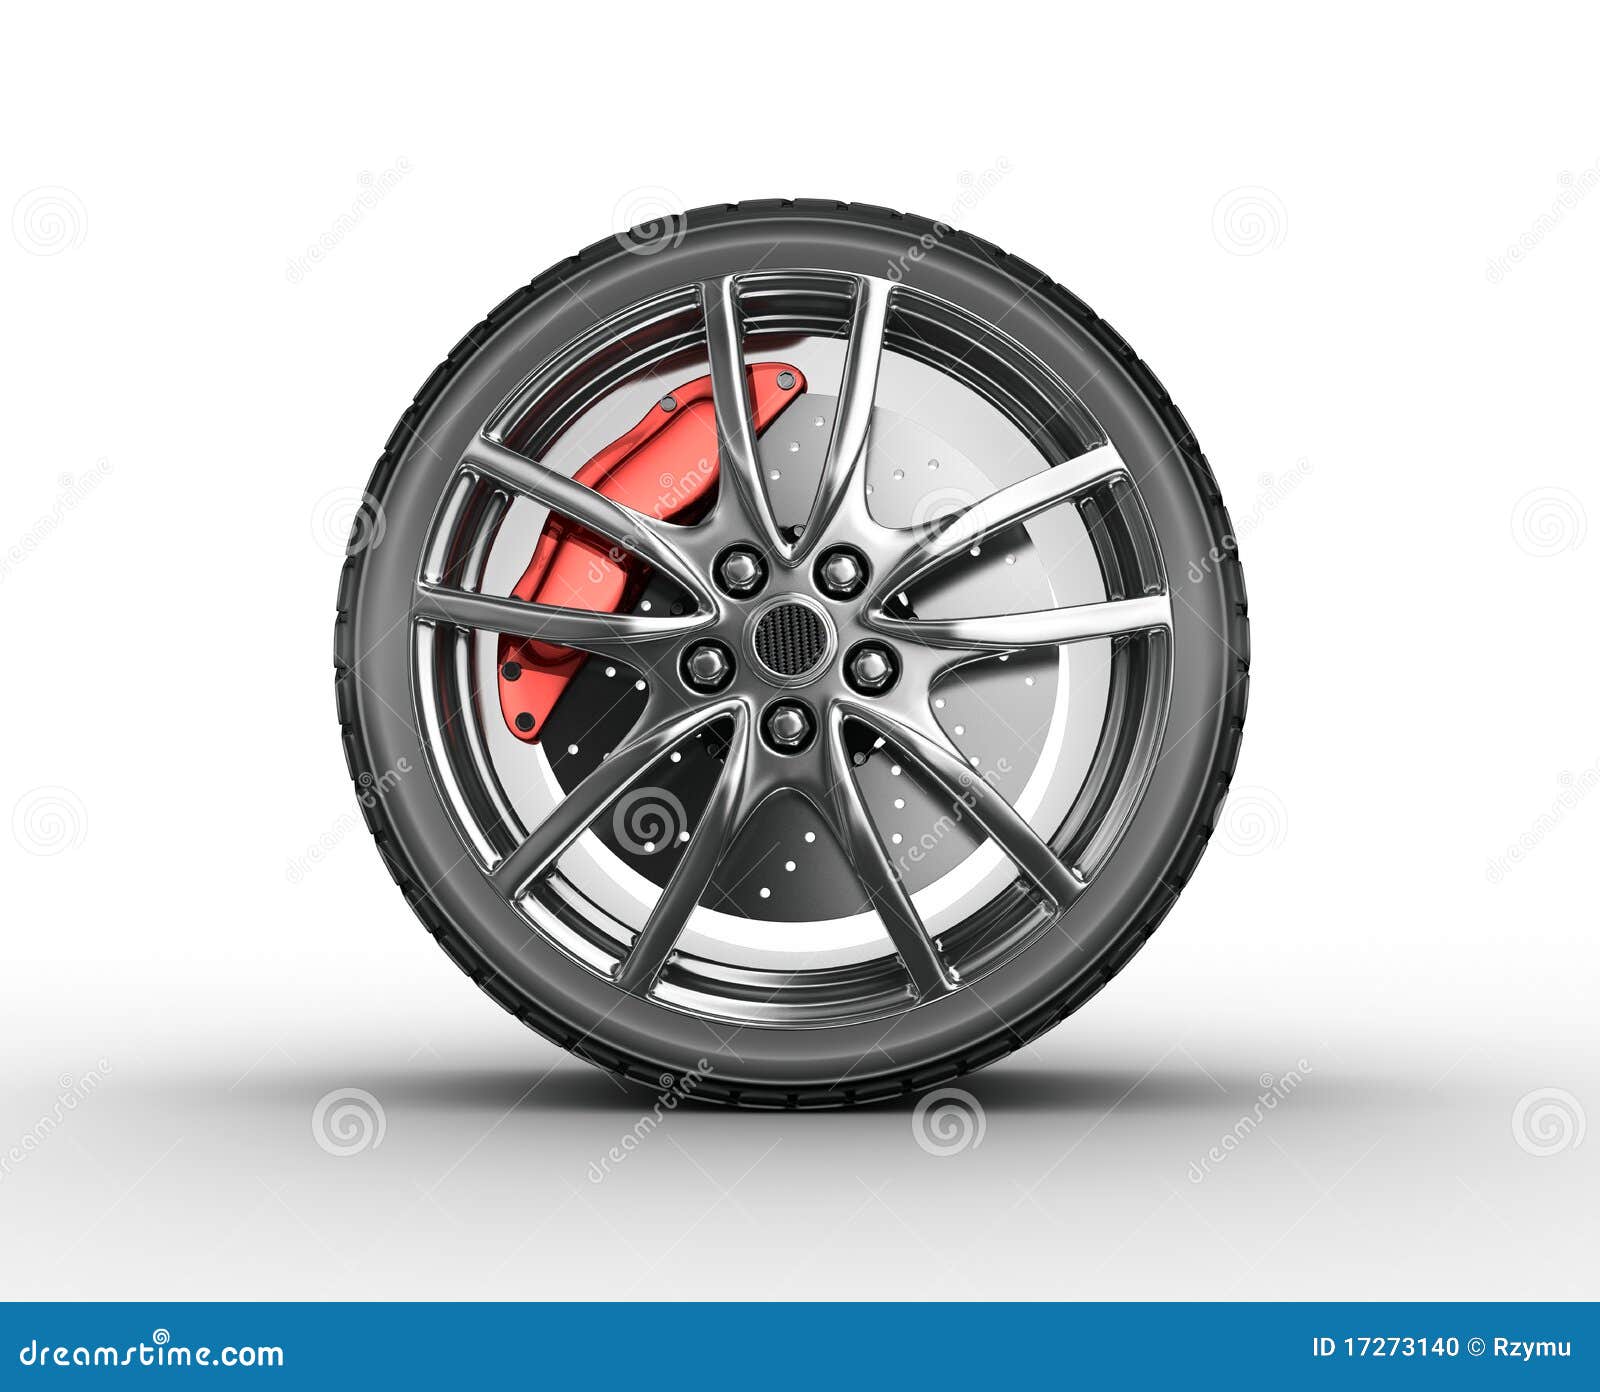 tire and alloy wheel - 3d render